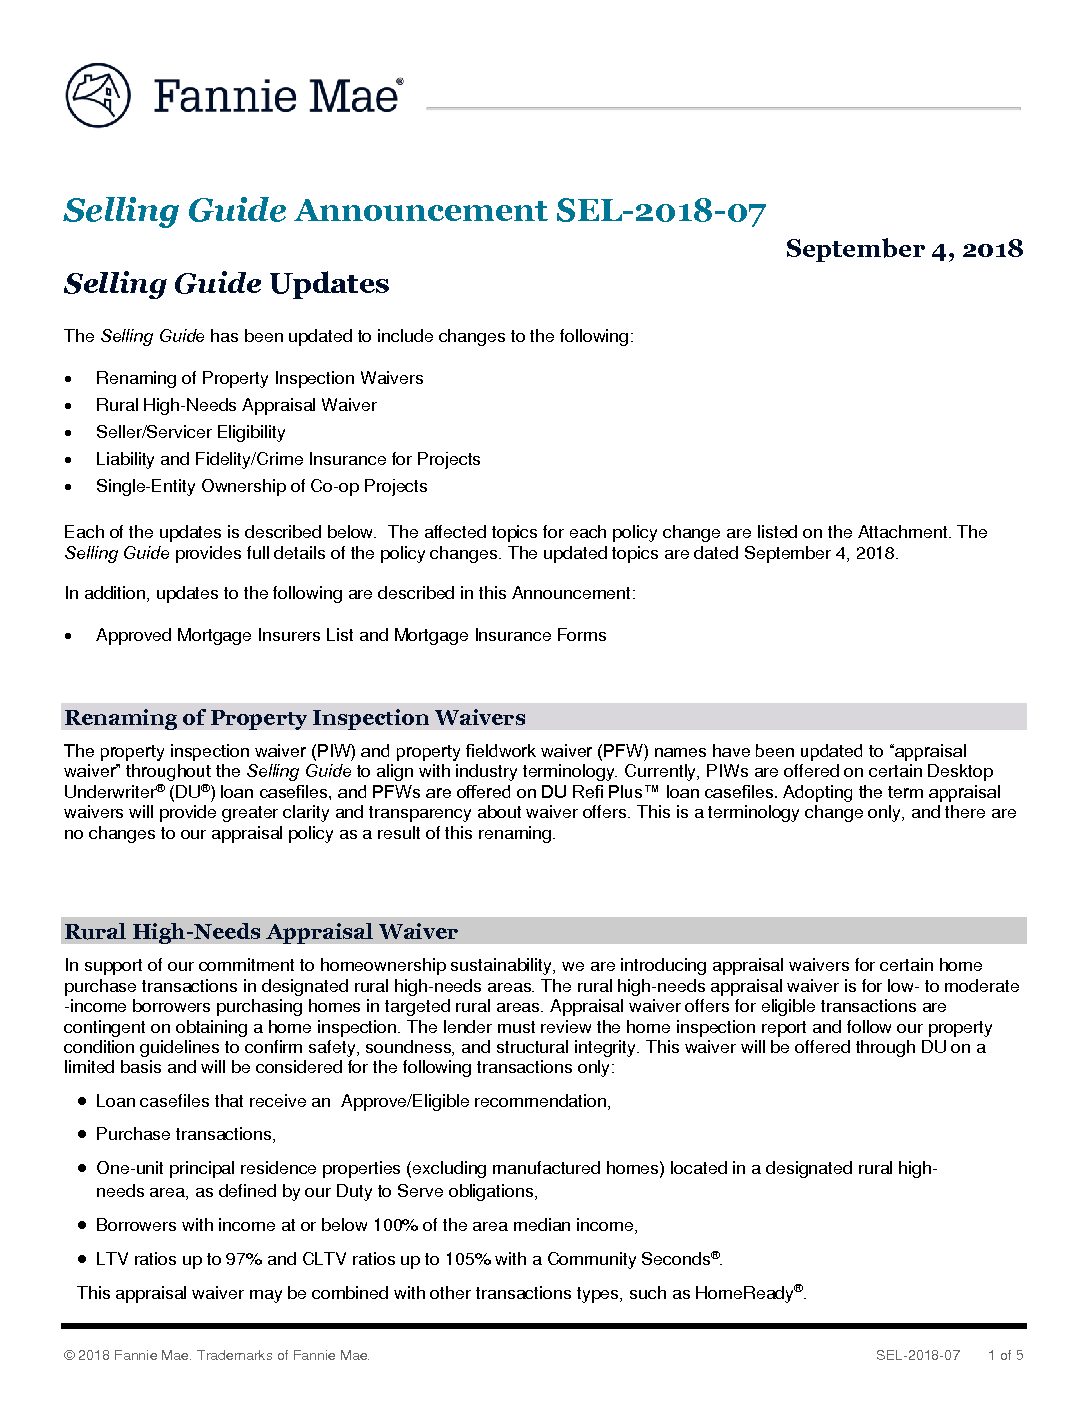 Click Here to View the Fannie Mae Selling Guide Announcement SEL2018